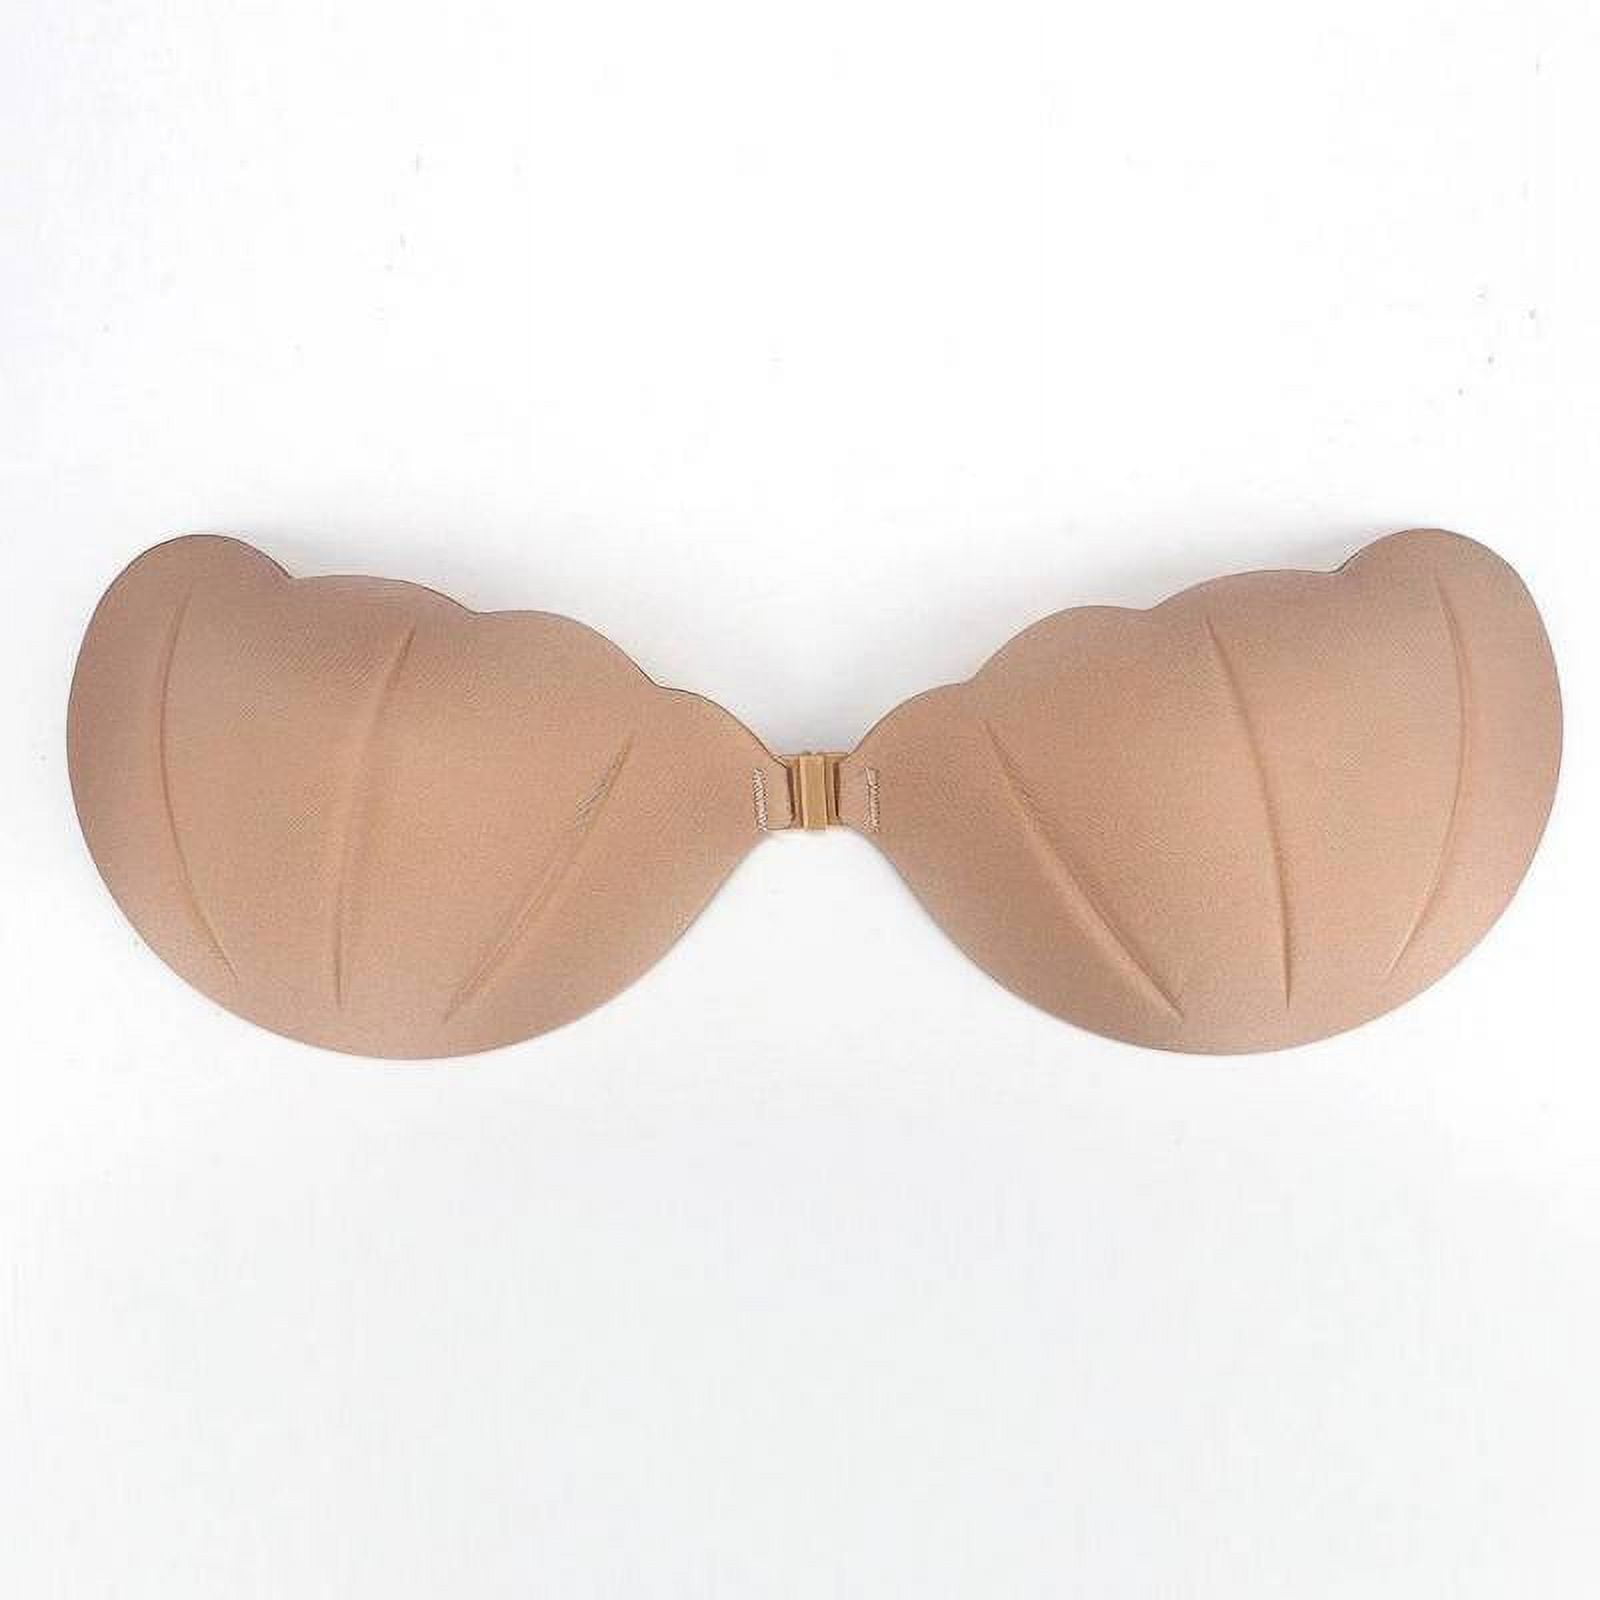 Breathable Seamless Adhesive Bra With Front Closure For Women Wire Free,  Push Up, Non Slip, Comfortable Lingerie From Elroyelissa, $7.13